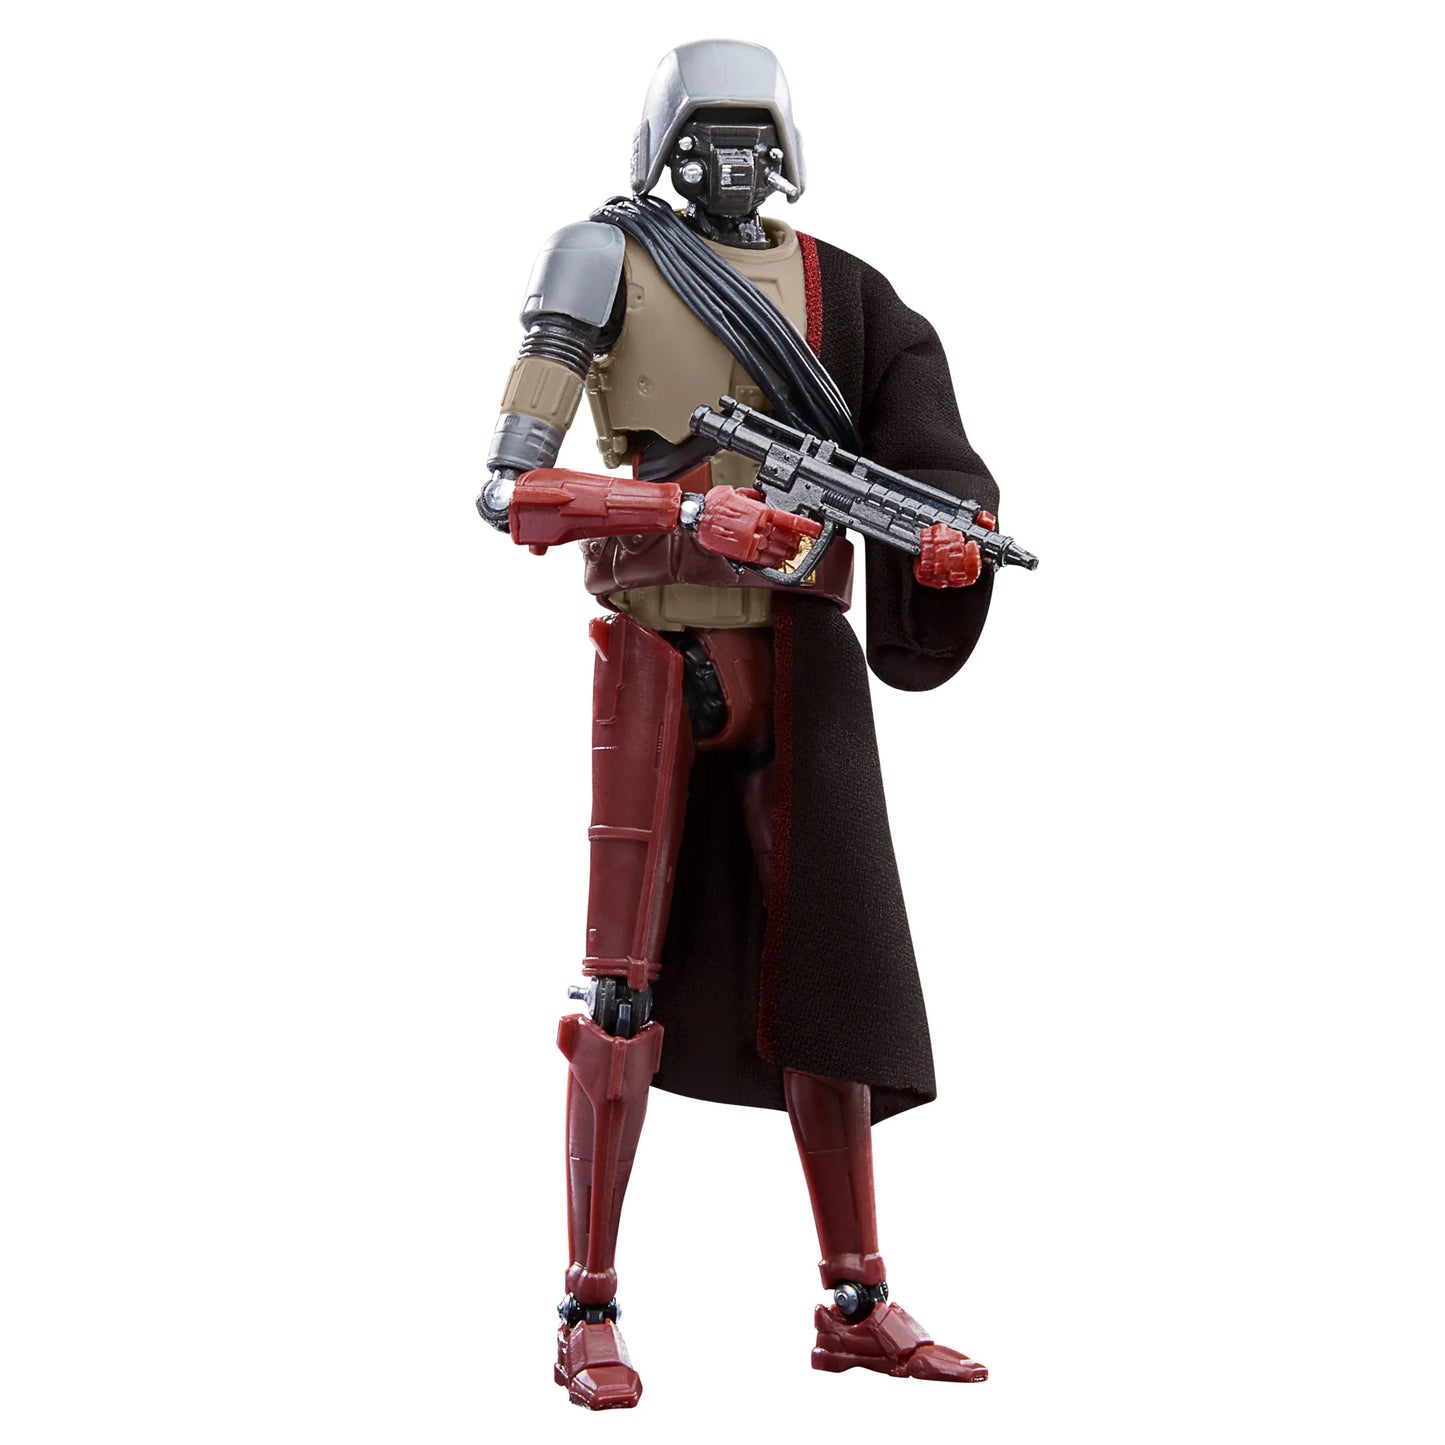 A detailed 6-inch Star Wars The Black Series HK-87 action figure, depicting the antiquated assassin droid design from The Mandalorian, complete with a character-inspired accessory and multiple points of articulation.